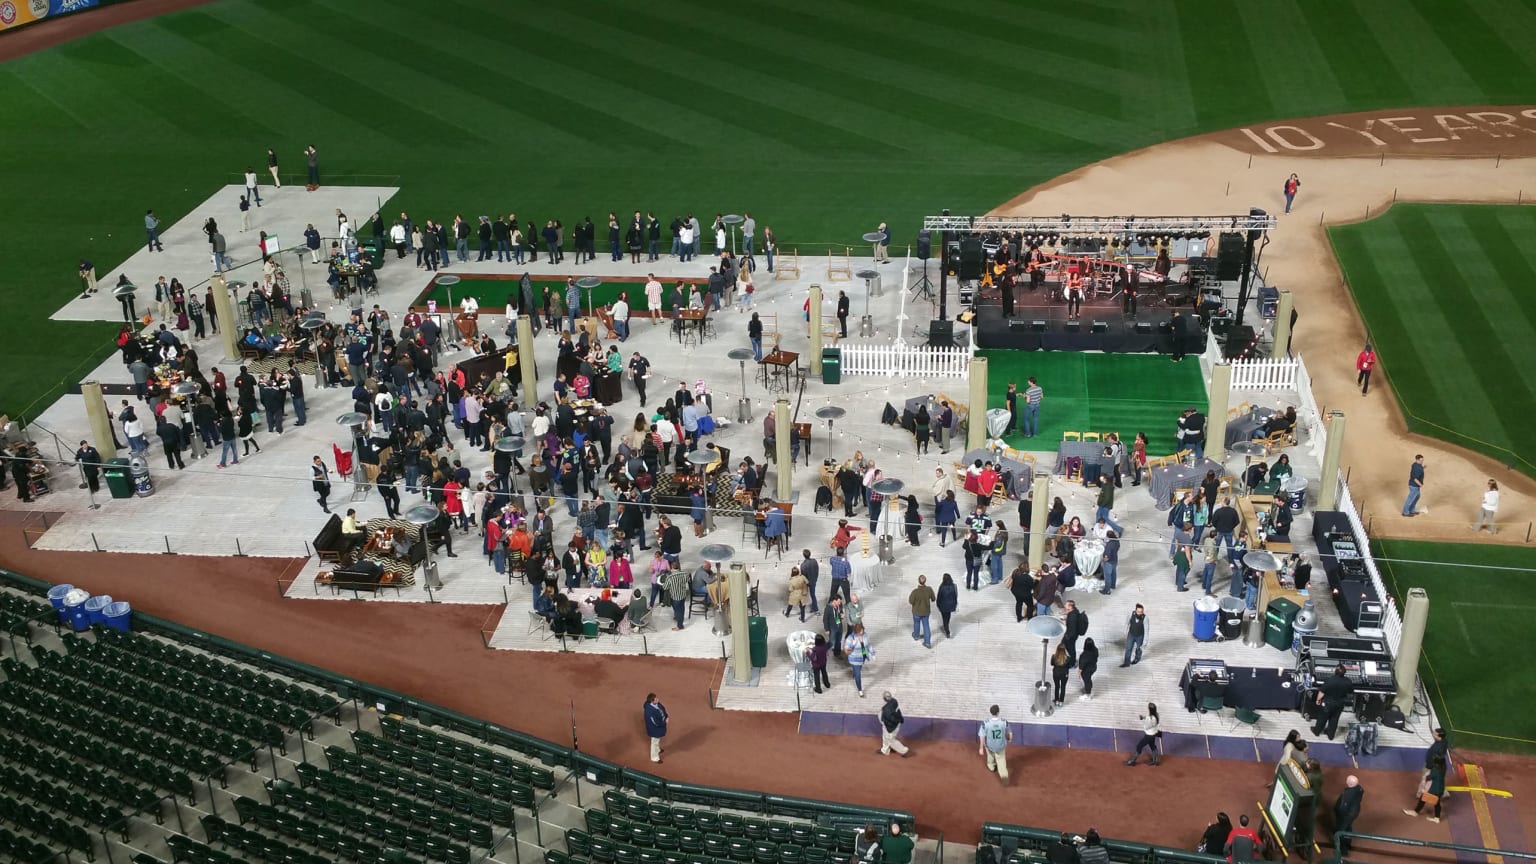 TMobile Park Events Outdoor Venues Field Seattle Mariners